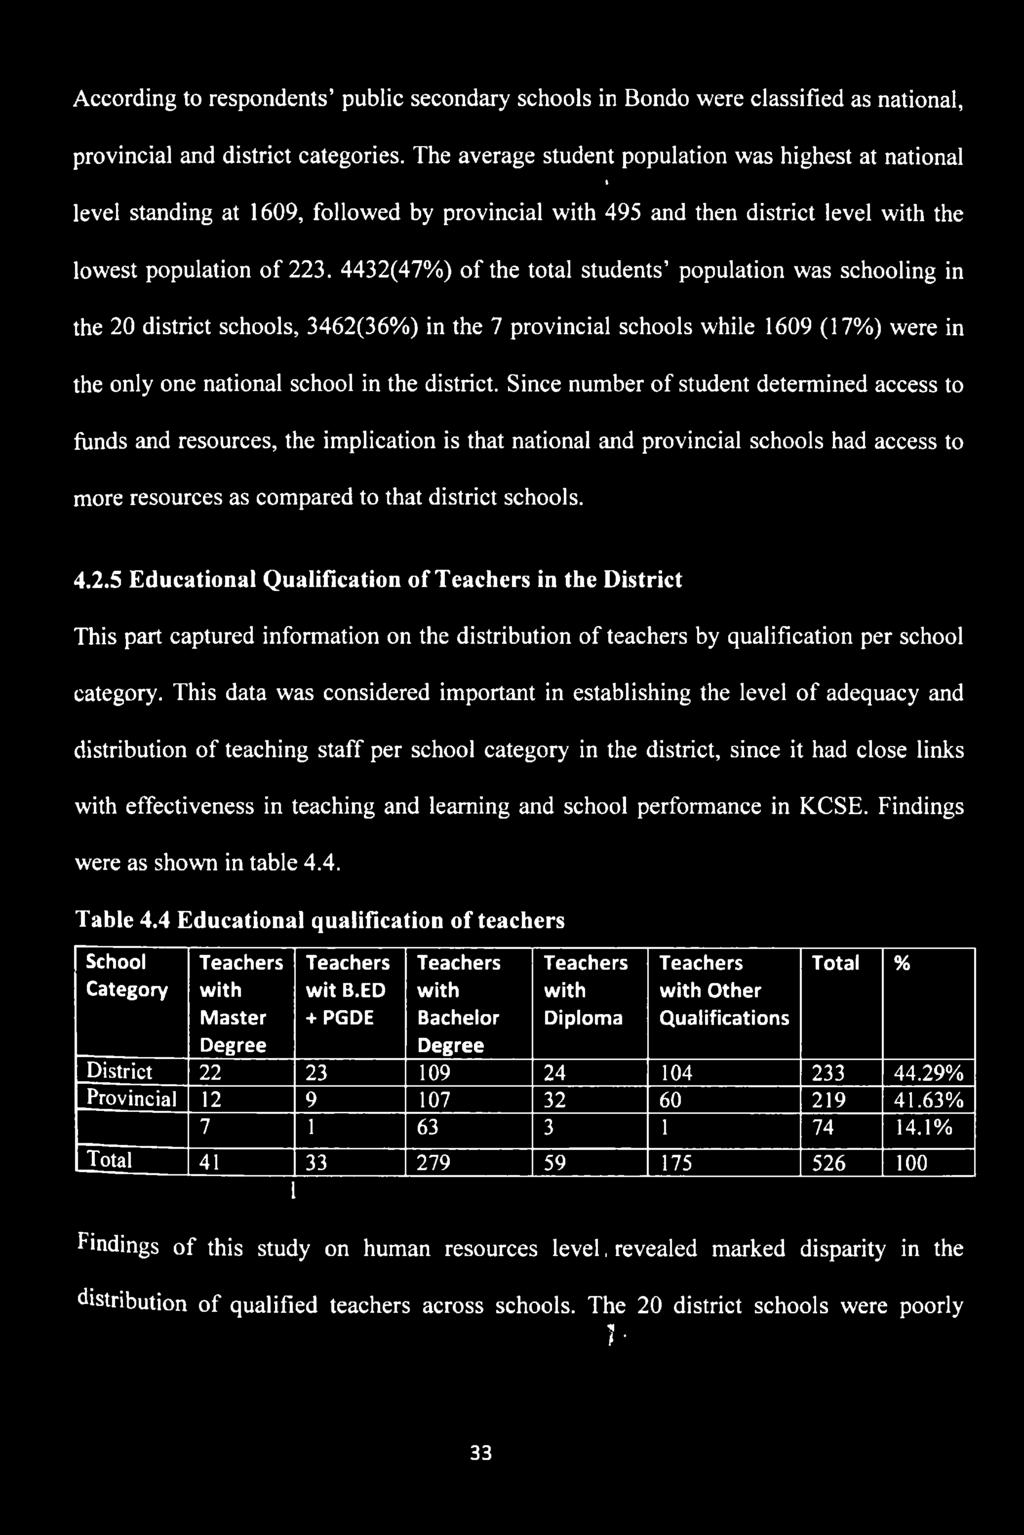 5 Educational Qualification of Teachers in the District This part captured information on the distribution of teachers by qualification per school category.